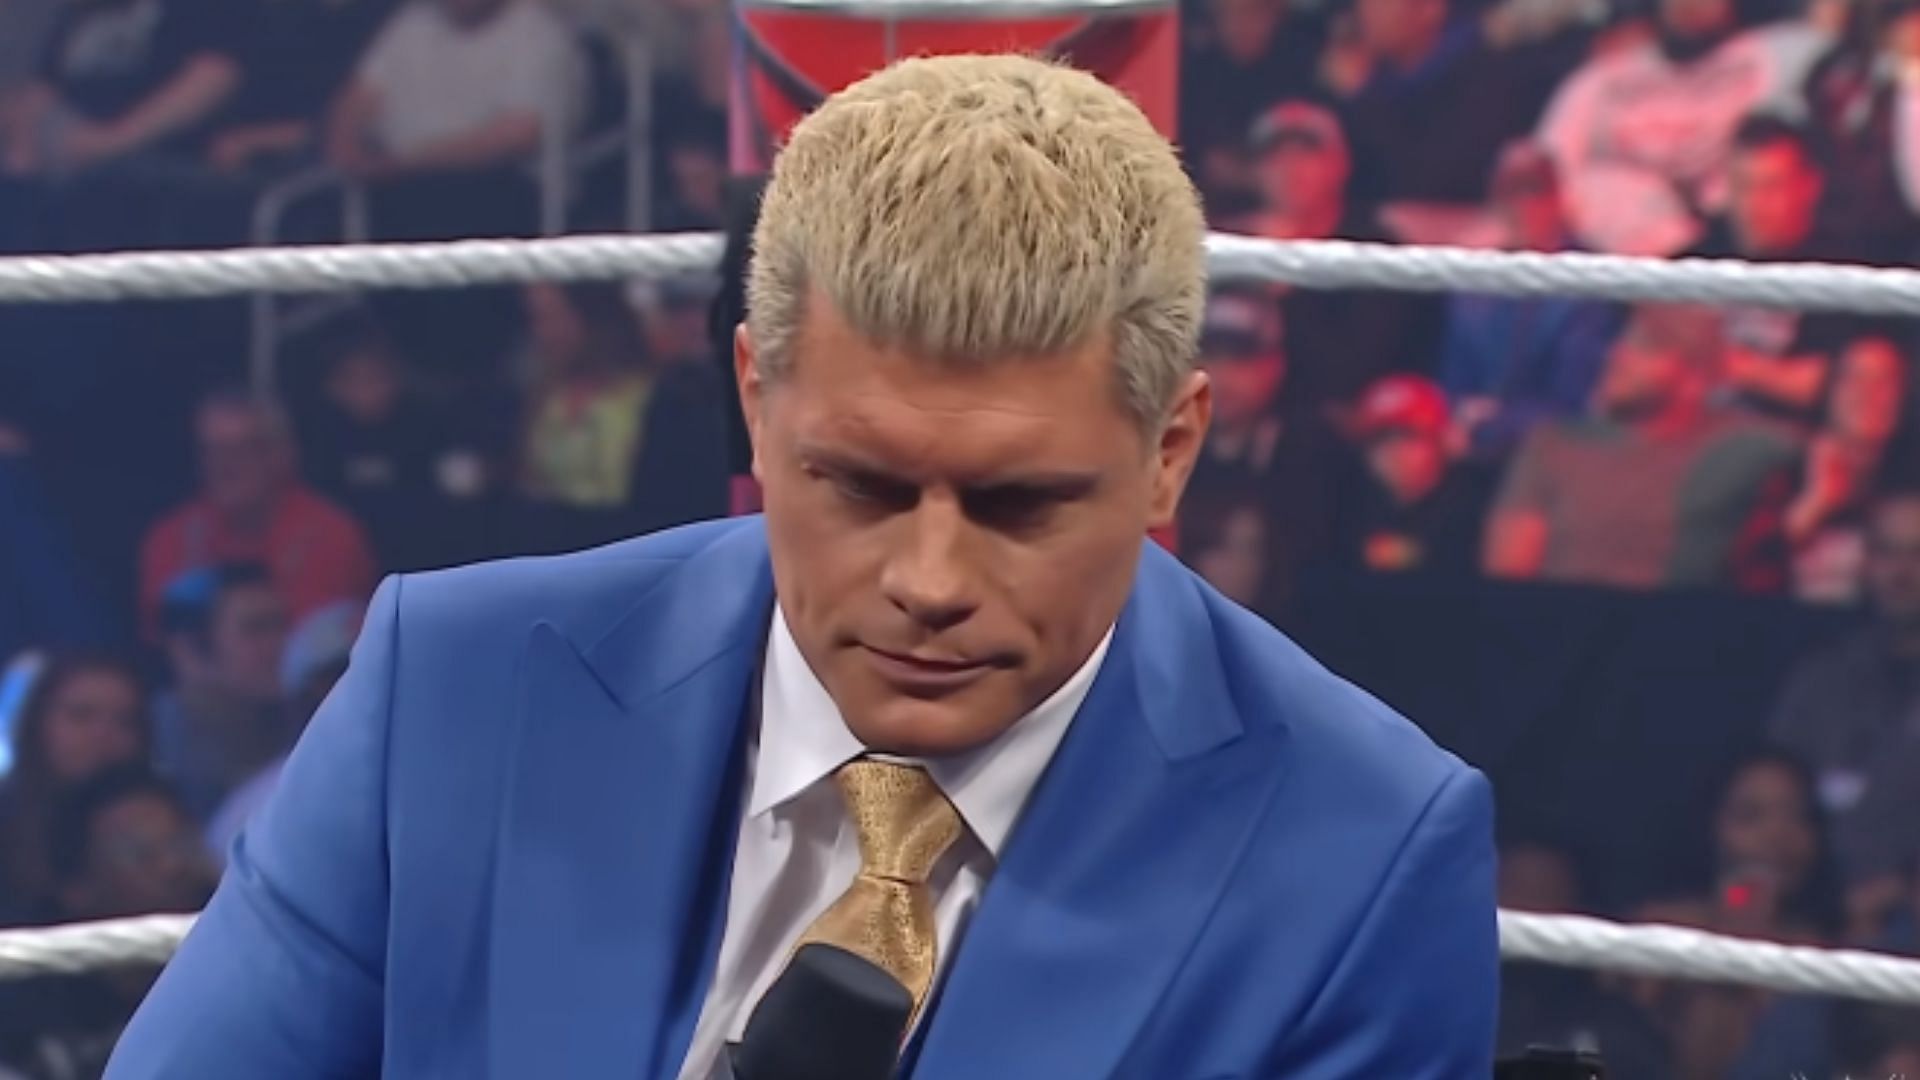 RAW Superstar Cody Rhodes returned to WWE at WrestleMania 38